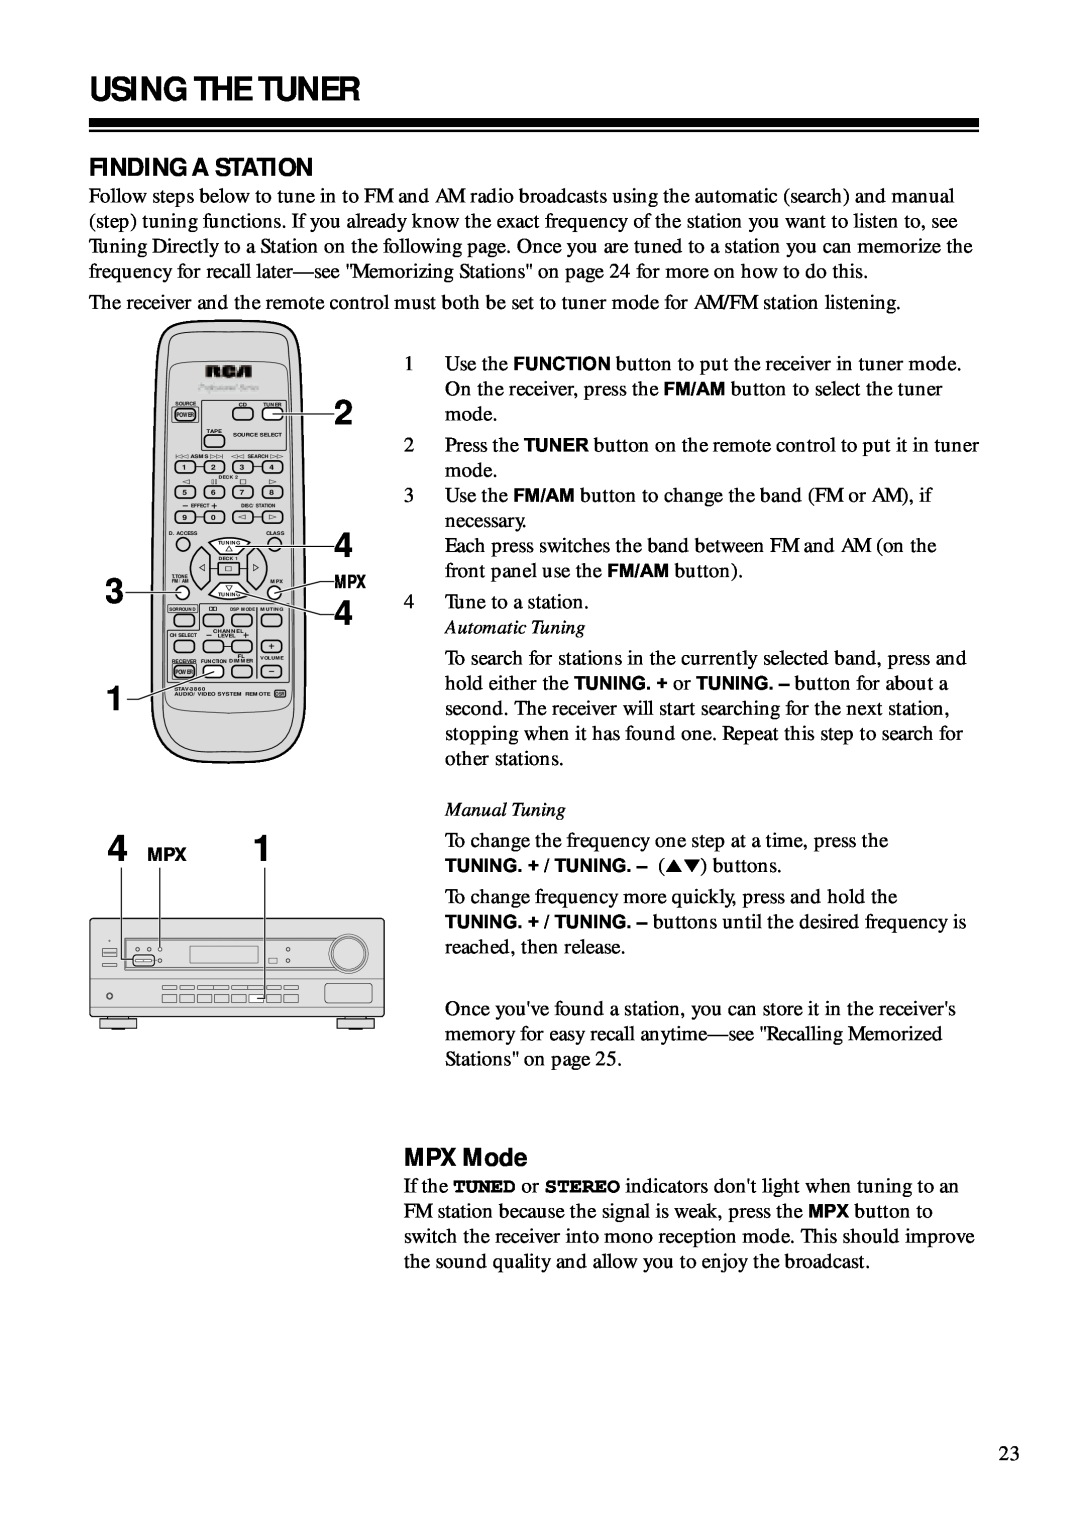 RCA STAV3860 owner manual Using The Tuner, Finding A Station, MPX Mode, Manual Tuning 